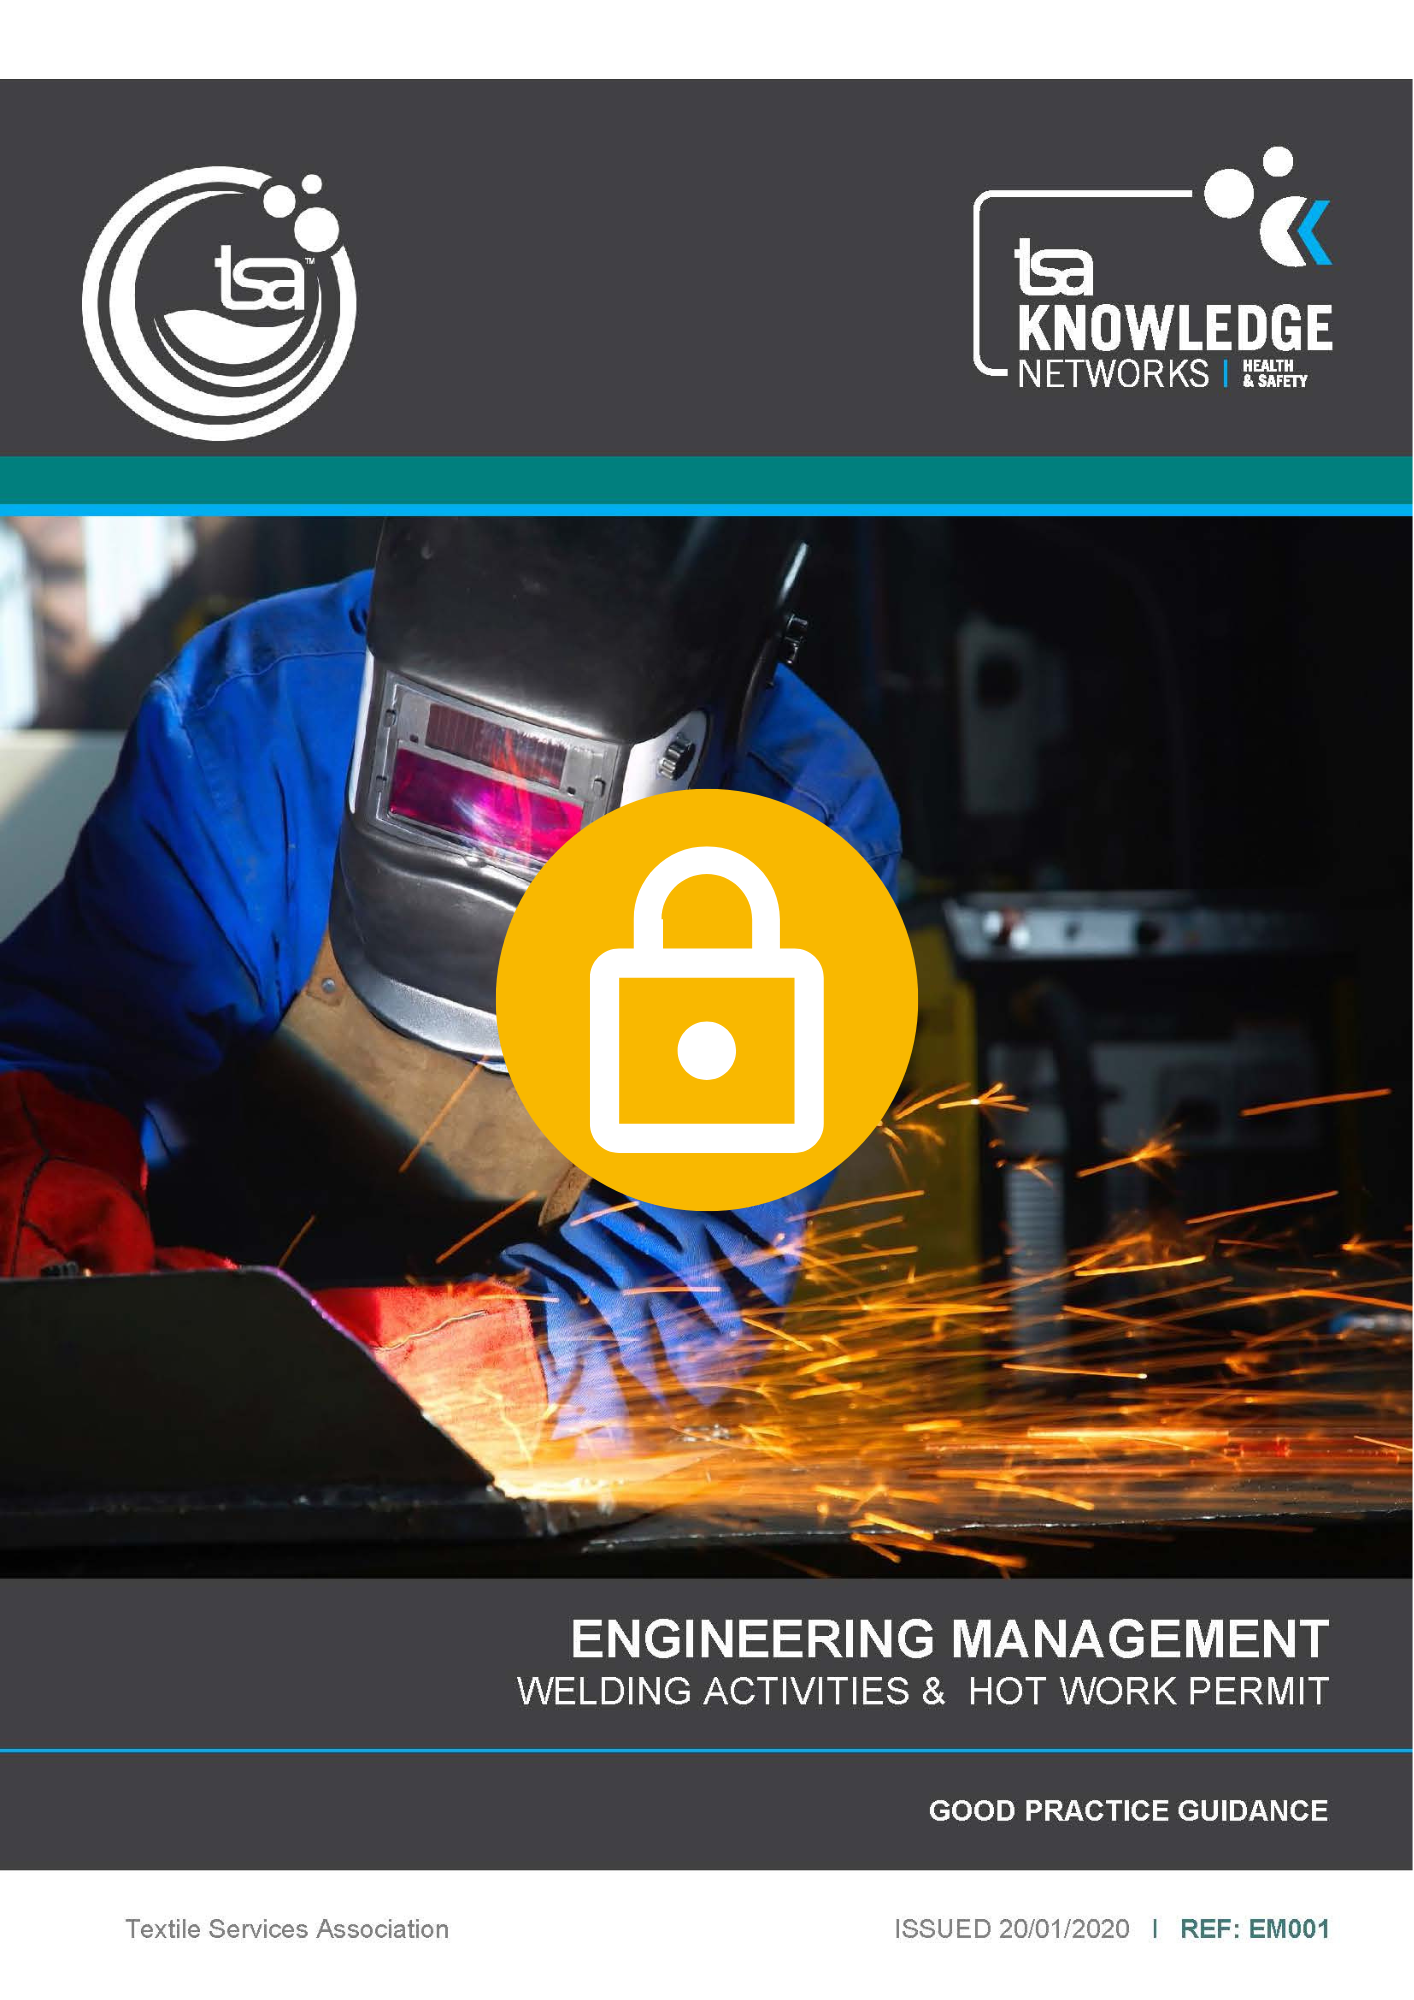 Fire Safety: Welding Activities and Hot Work Permit